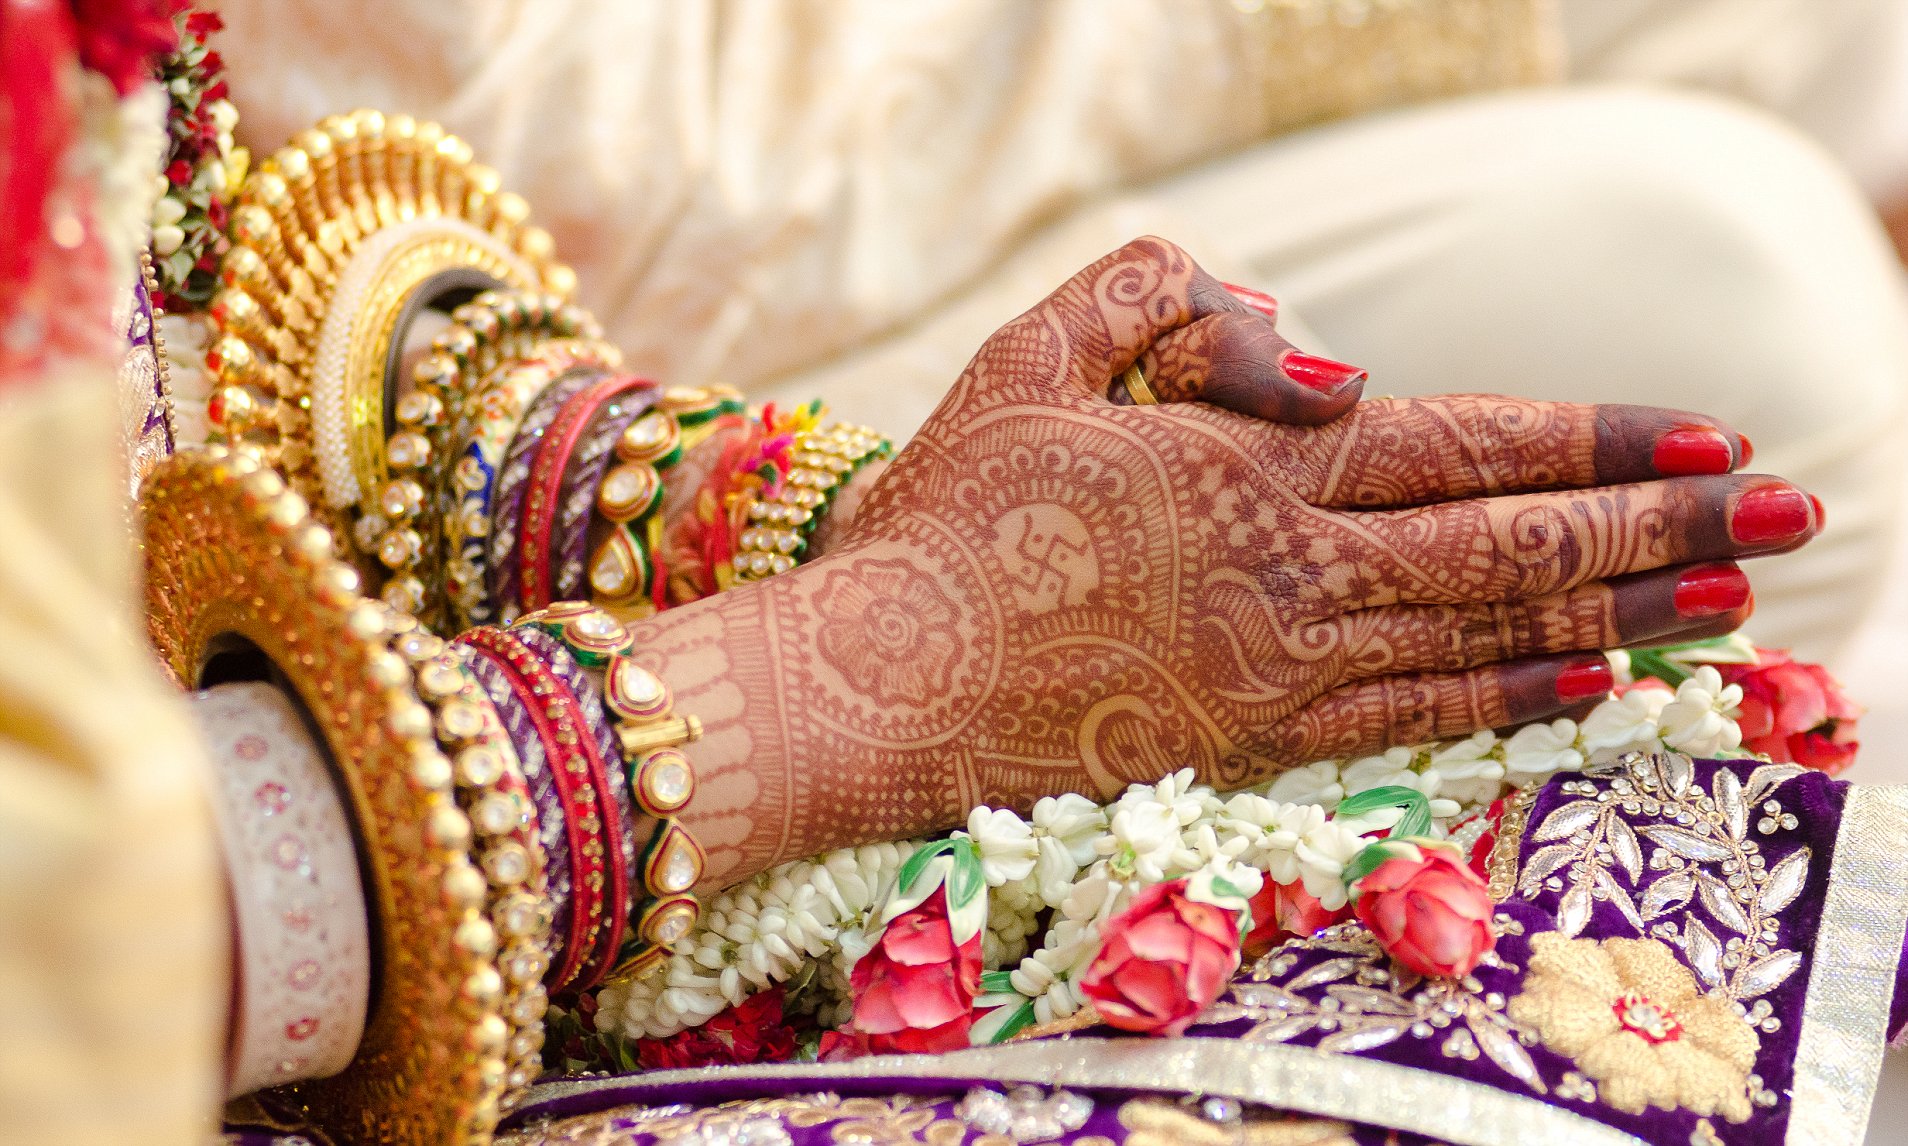 Traditional bridal jewelry and henna decoration on the hands of the bride during a religious ceremony at a Hindu wedding in Jaipur.